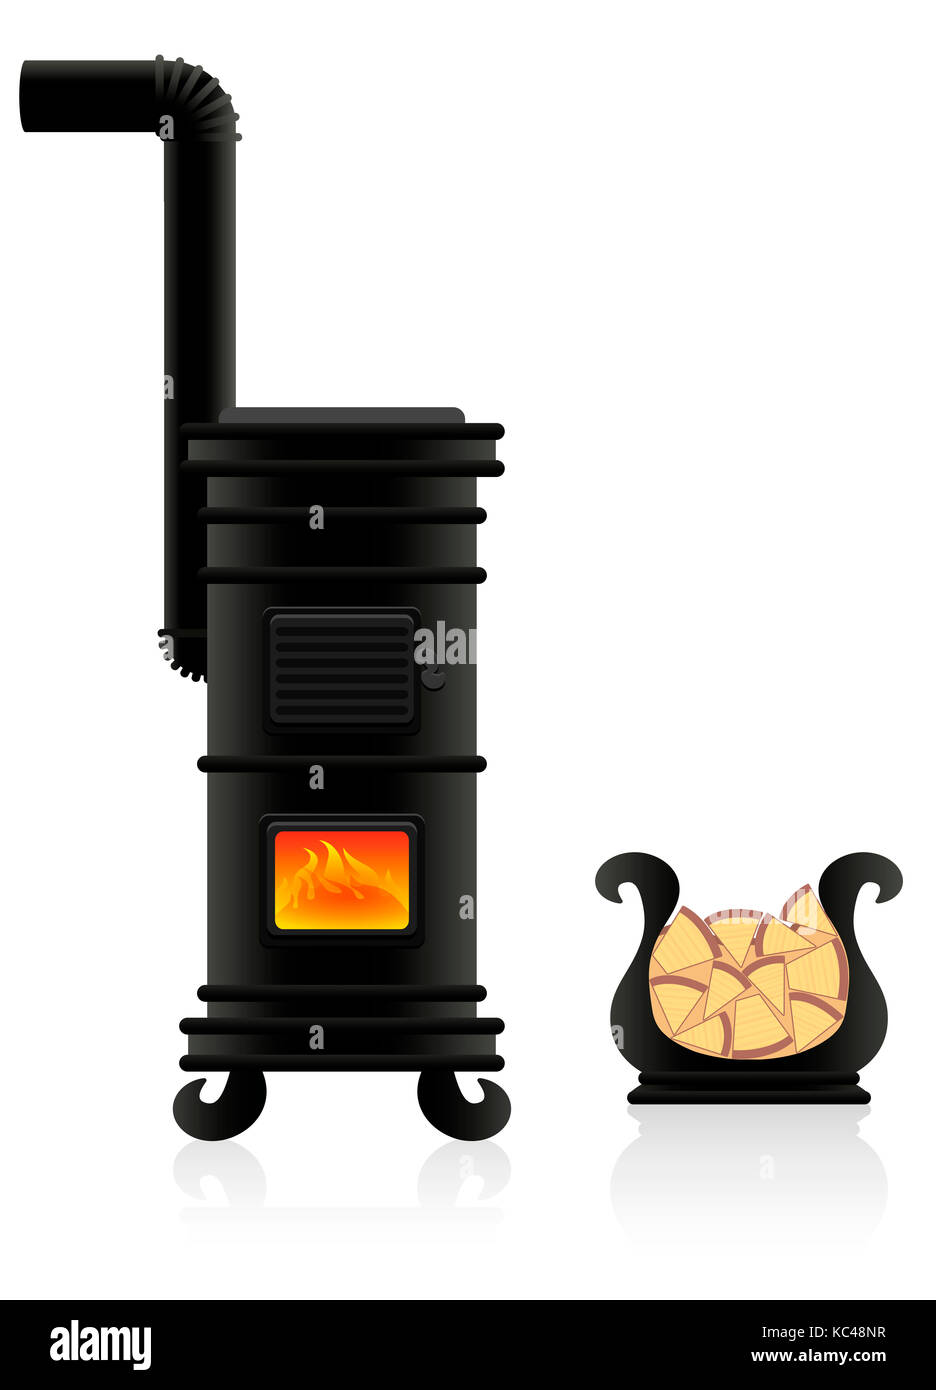 Potbelly stove - antique cast iron stove with flames at the viewing window, plus vessel for firewood. Illustration on white background. Stock Photo